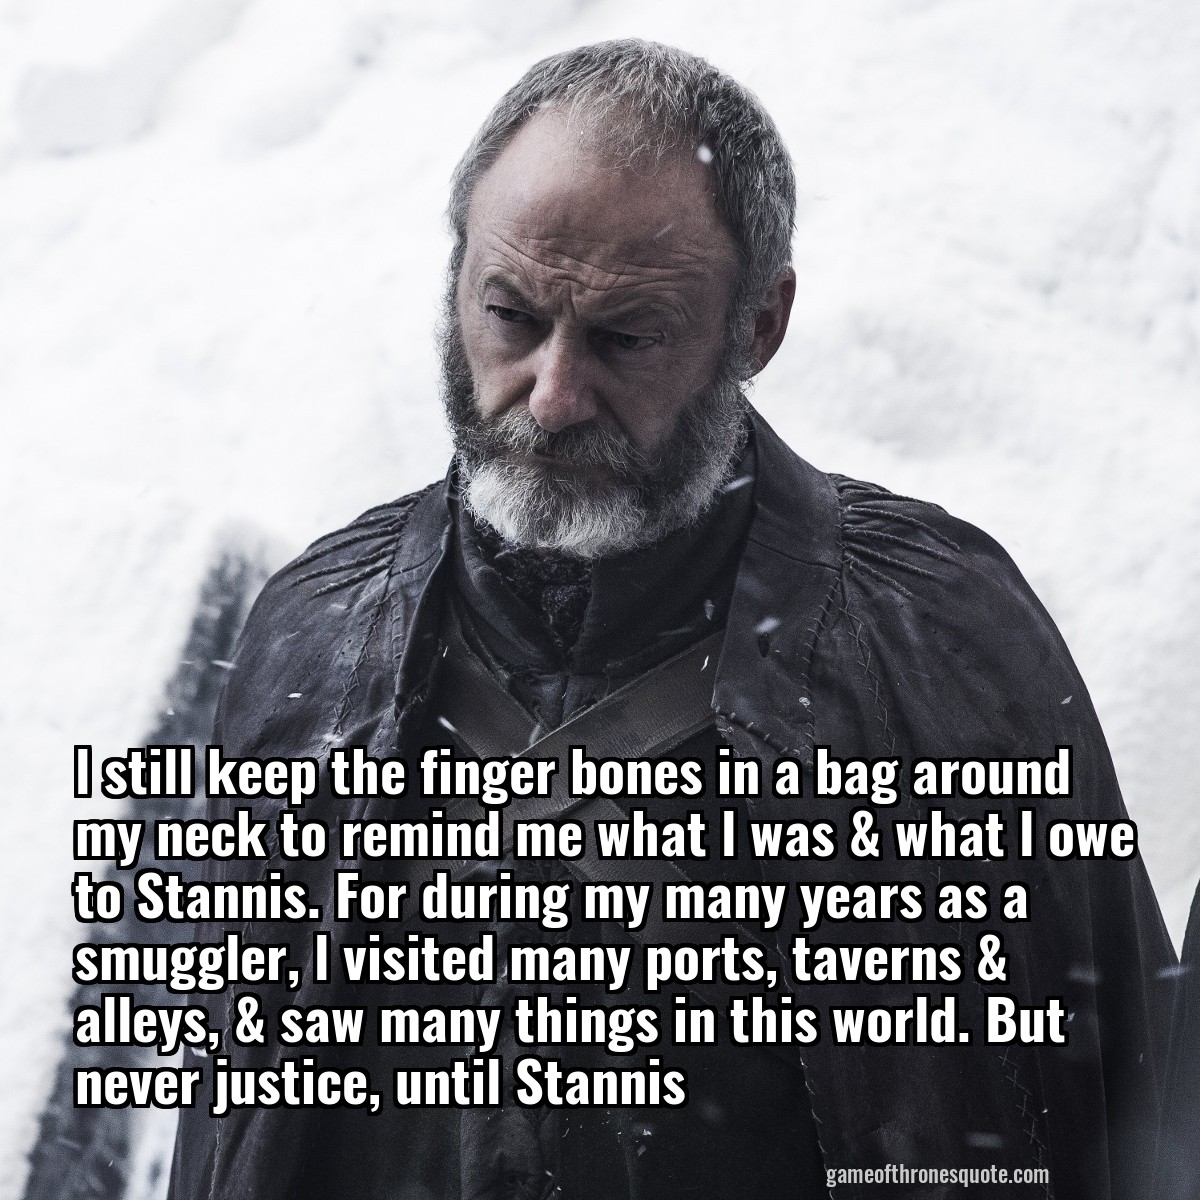 l still keep the finger bones in a bag around my neck to remind me what l was & what l owe to Stannis. For during my many years as a smuggler, l visited many ports, taverns &  alleys, & saw many things in this world. But never justice, until Stannis